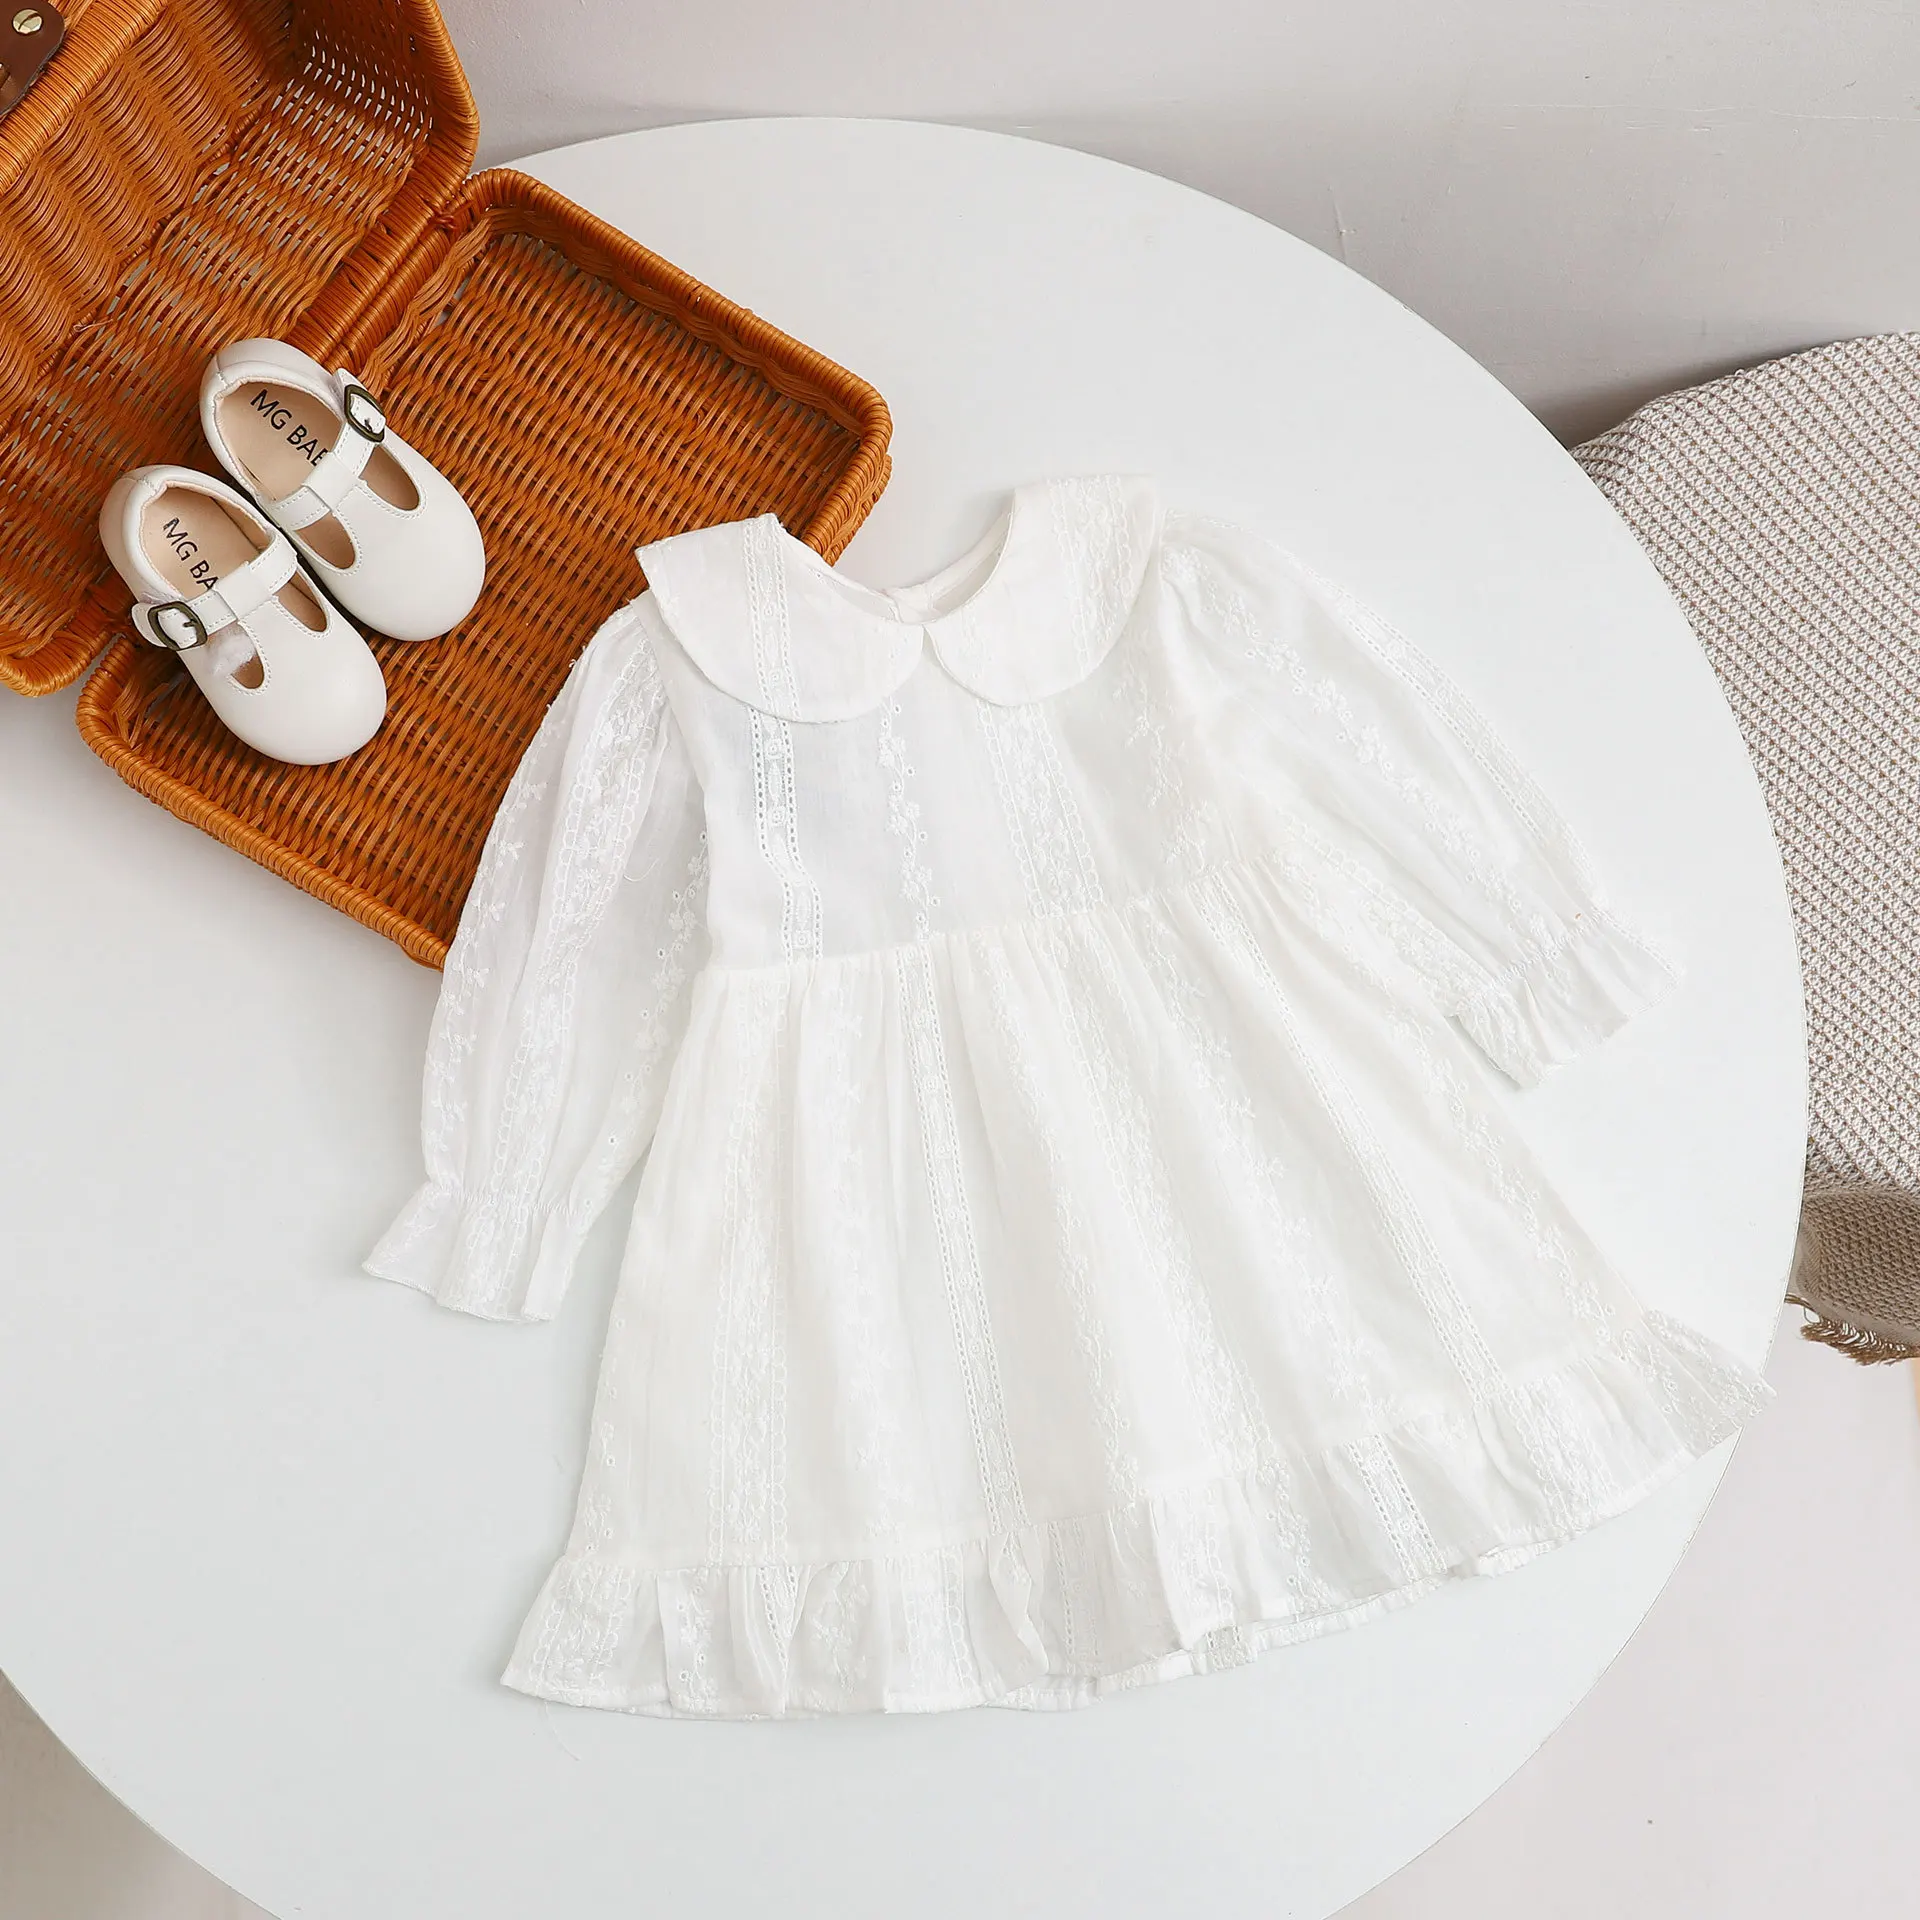 Girls' dress autumn new baby white lace embroidery children's sweet dress